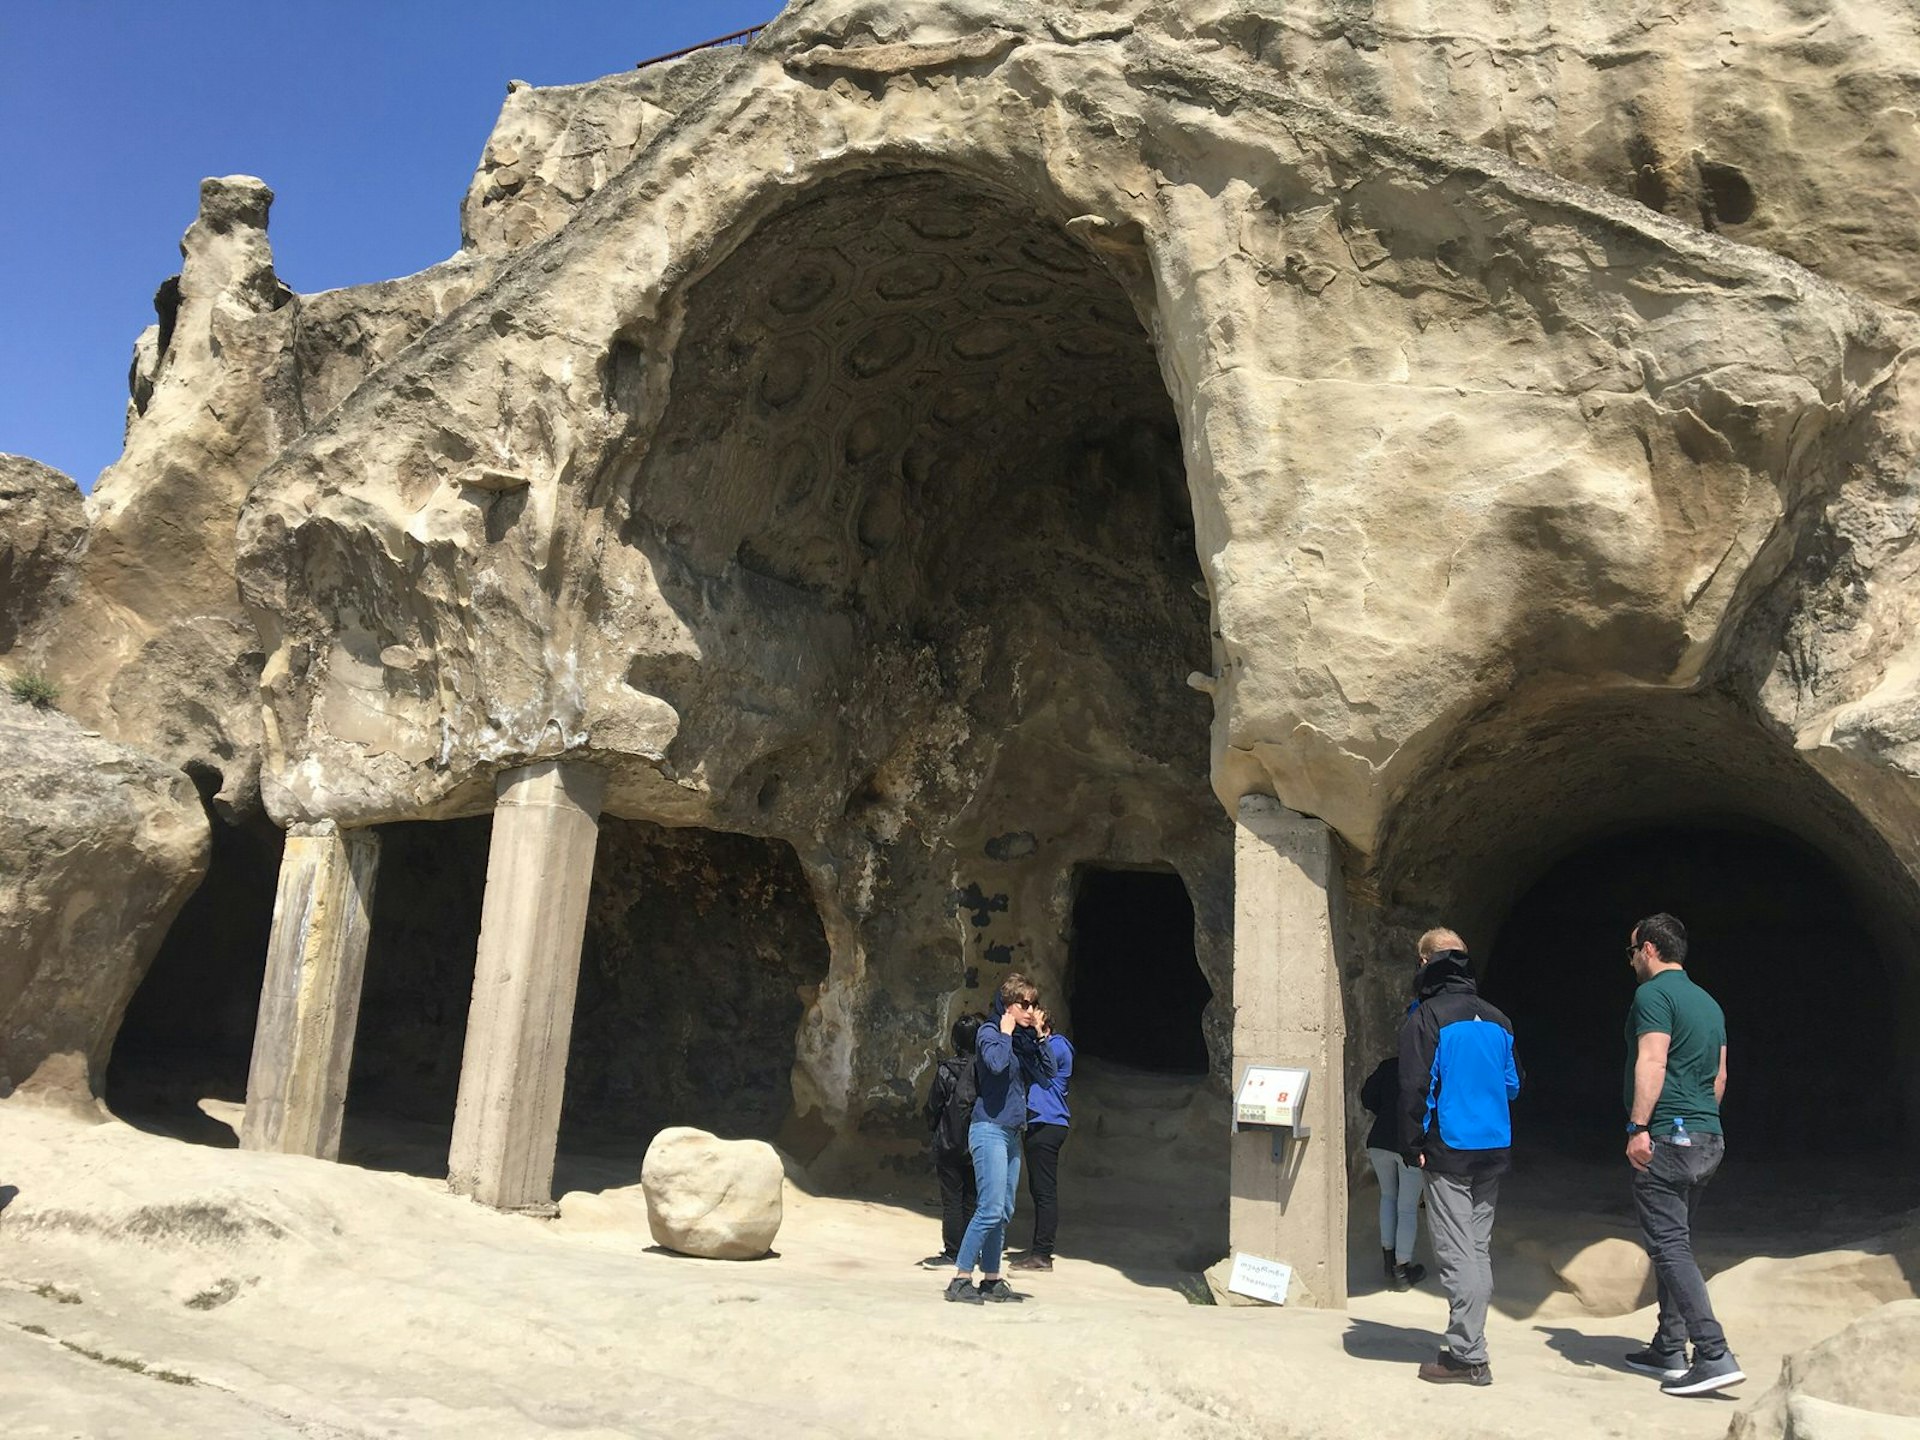 A large archway and pillars supporting a cave structure. Several people are standing near the entrance